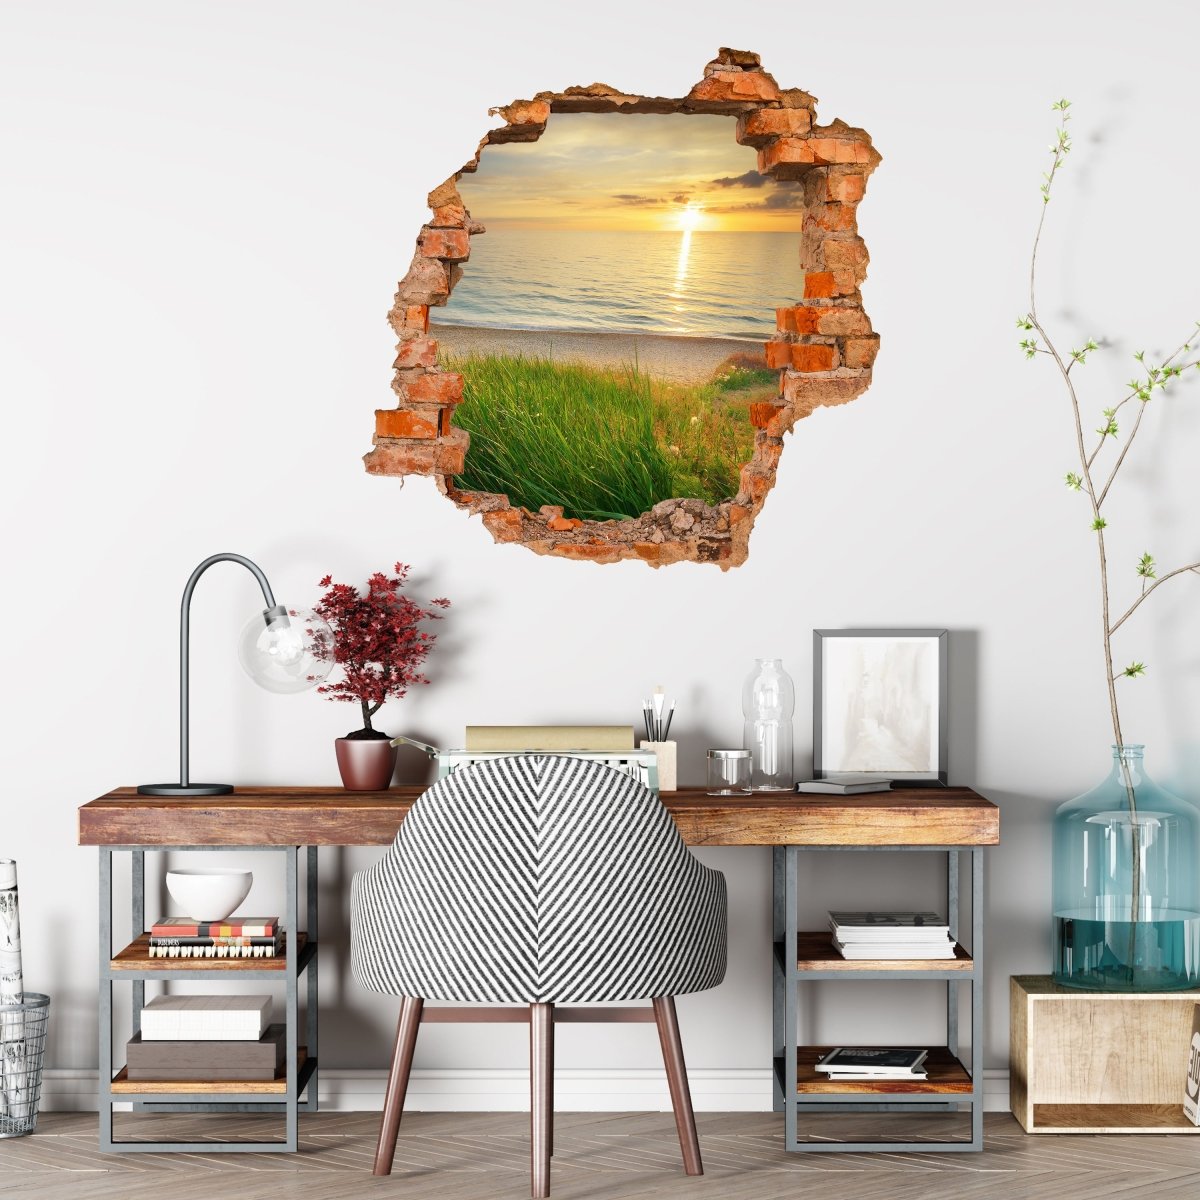 3D wall sticker Sunset on the coast - Wall decal M0913